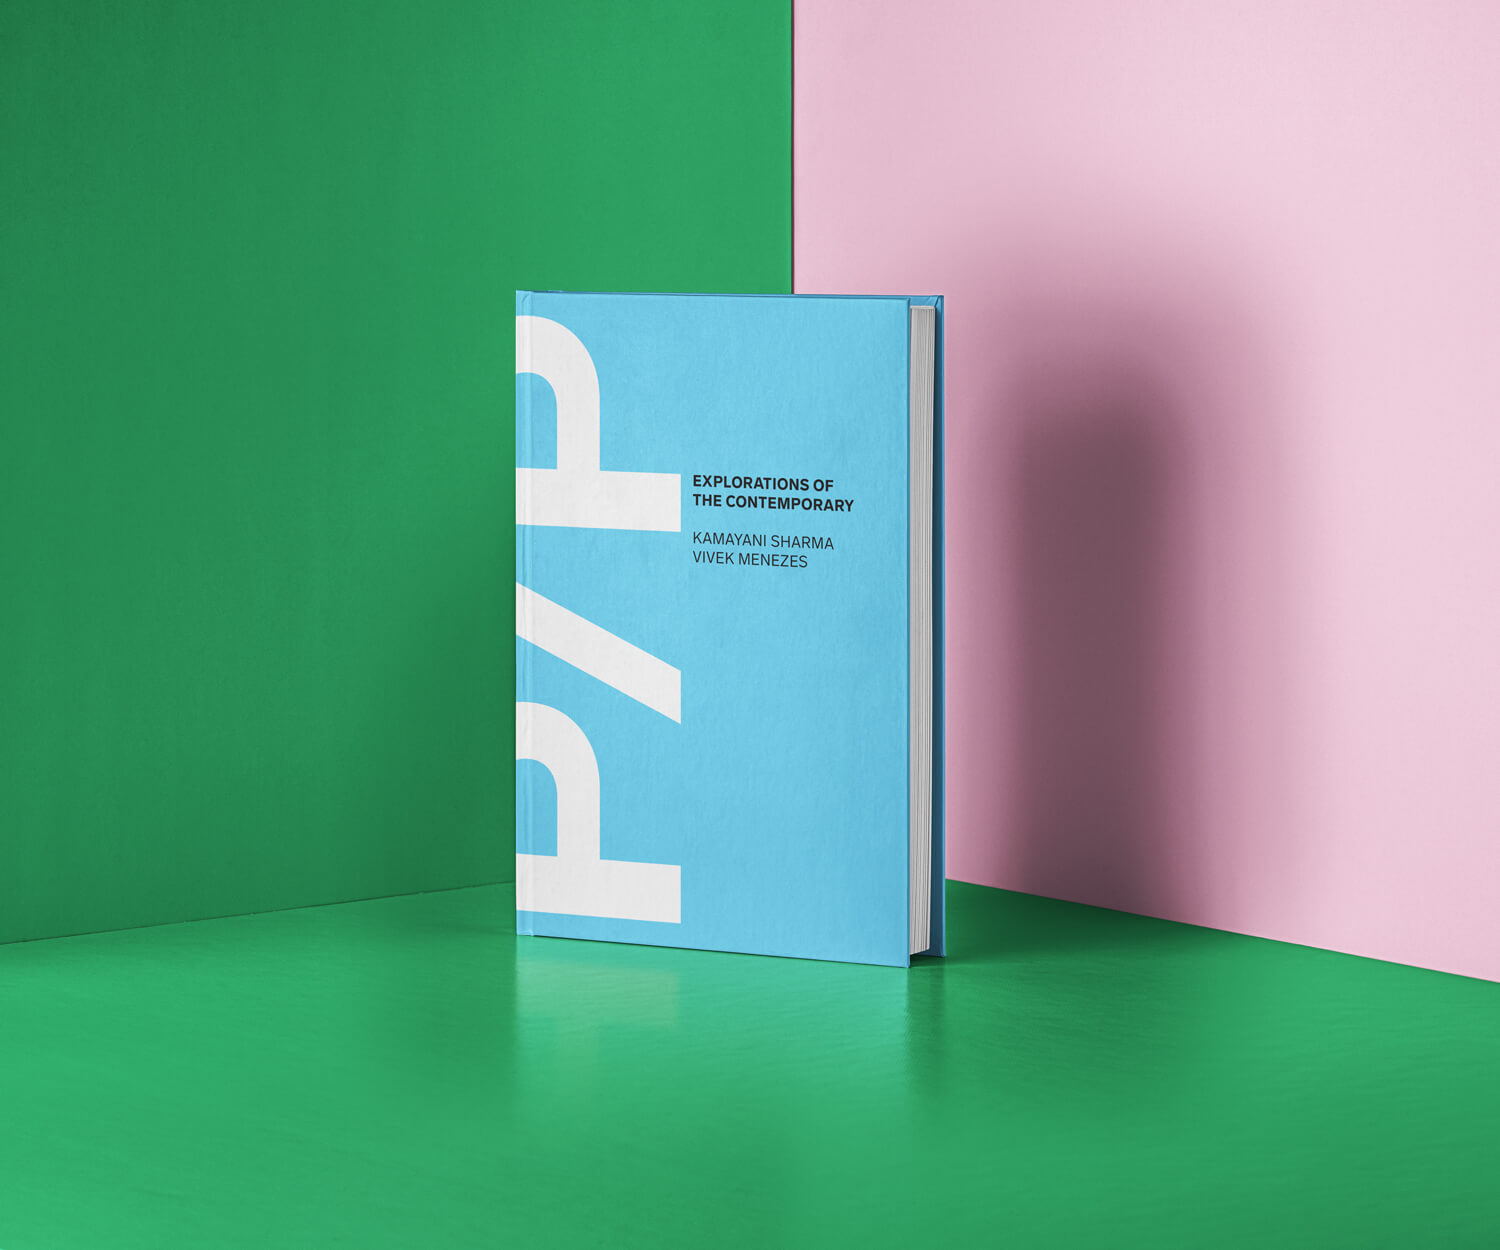 Photo of Volume IV of the 2019 edition of Projects/Processes